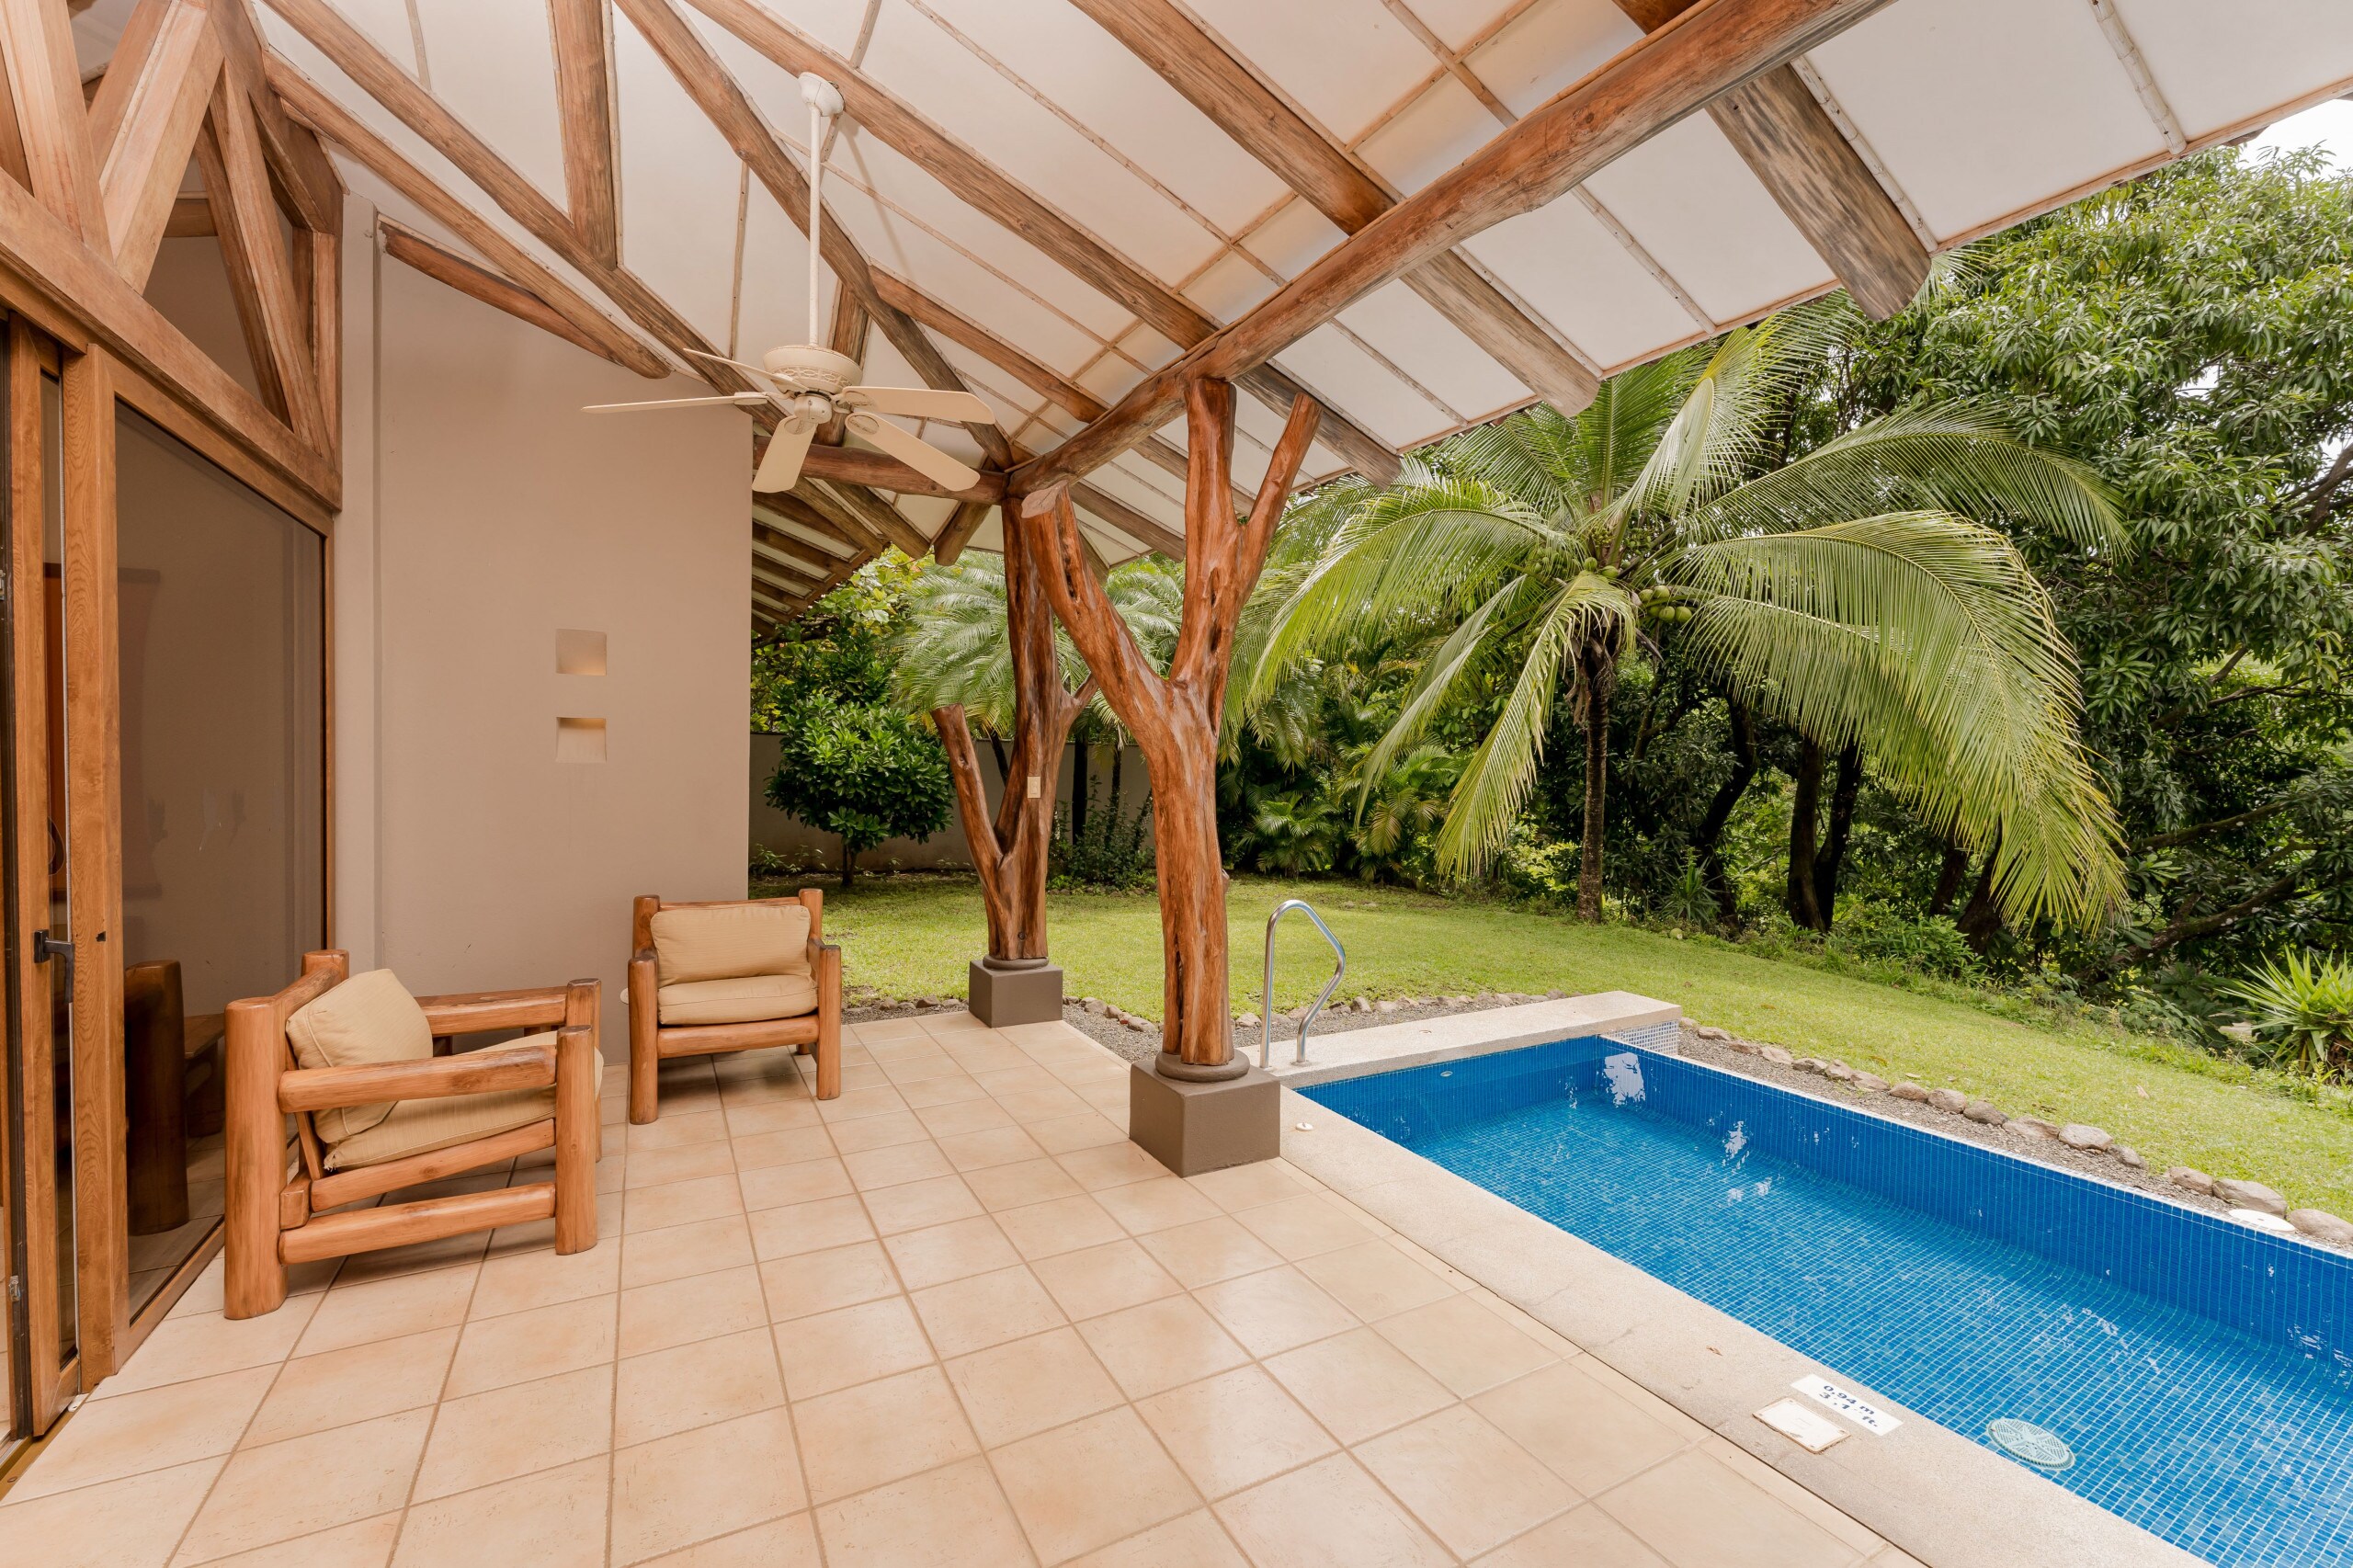 Property Image 2 - Laurel, charming, private, and rustic-style 3 bedroom villa